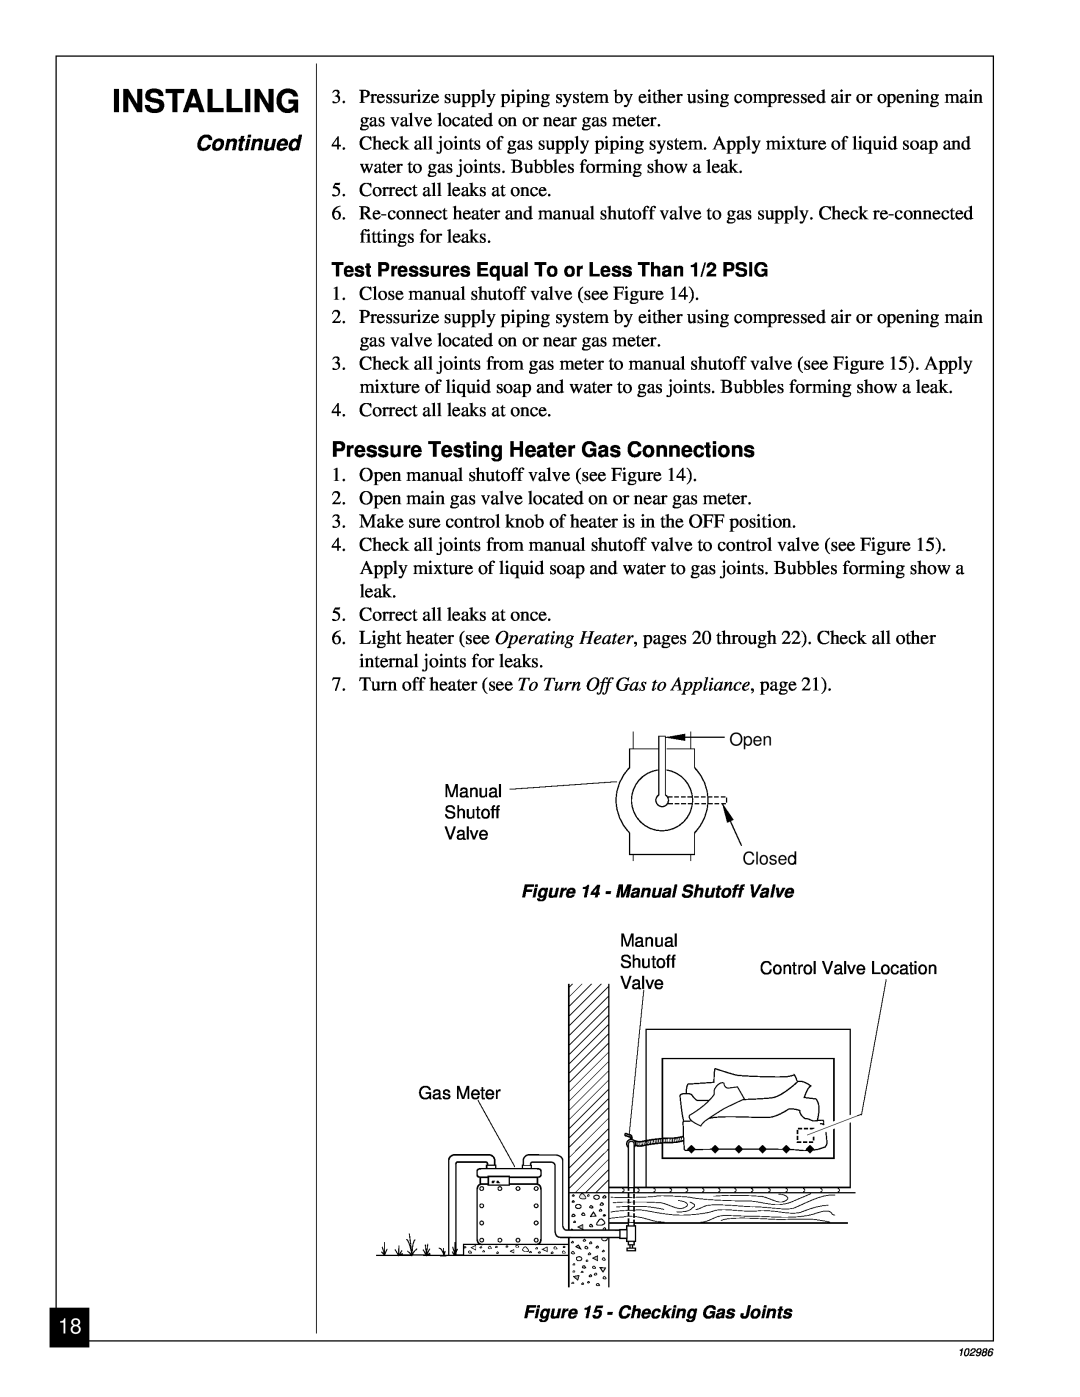 Desa Tech CGD3018N, CGD3924N, CGD3930N installation manual Installing, Continued, Pressure Testing Heater Gas Connections 